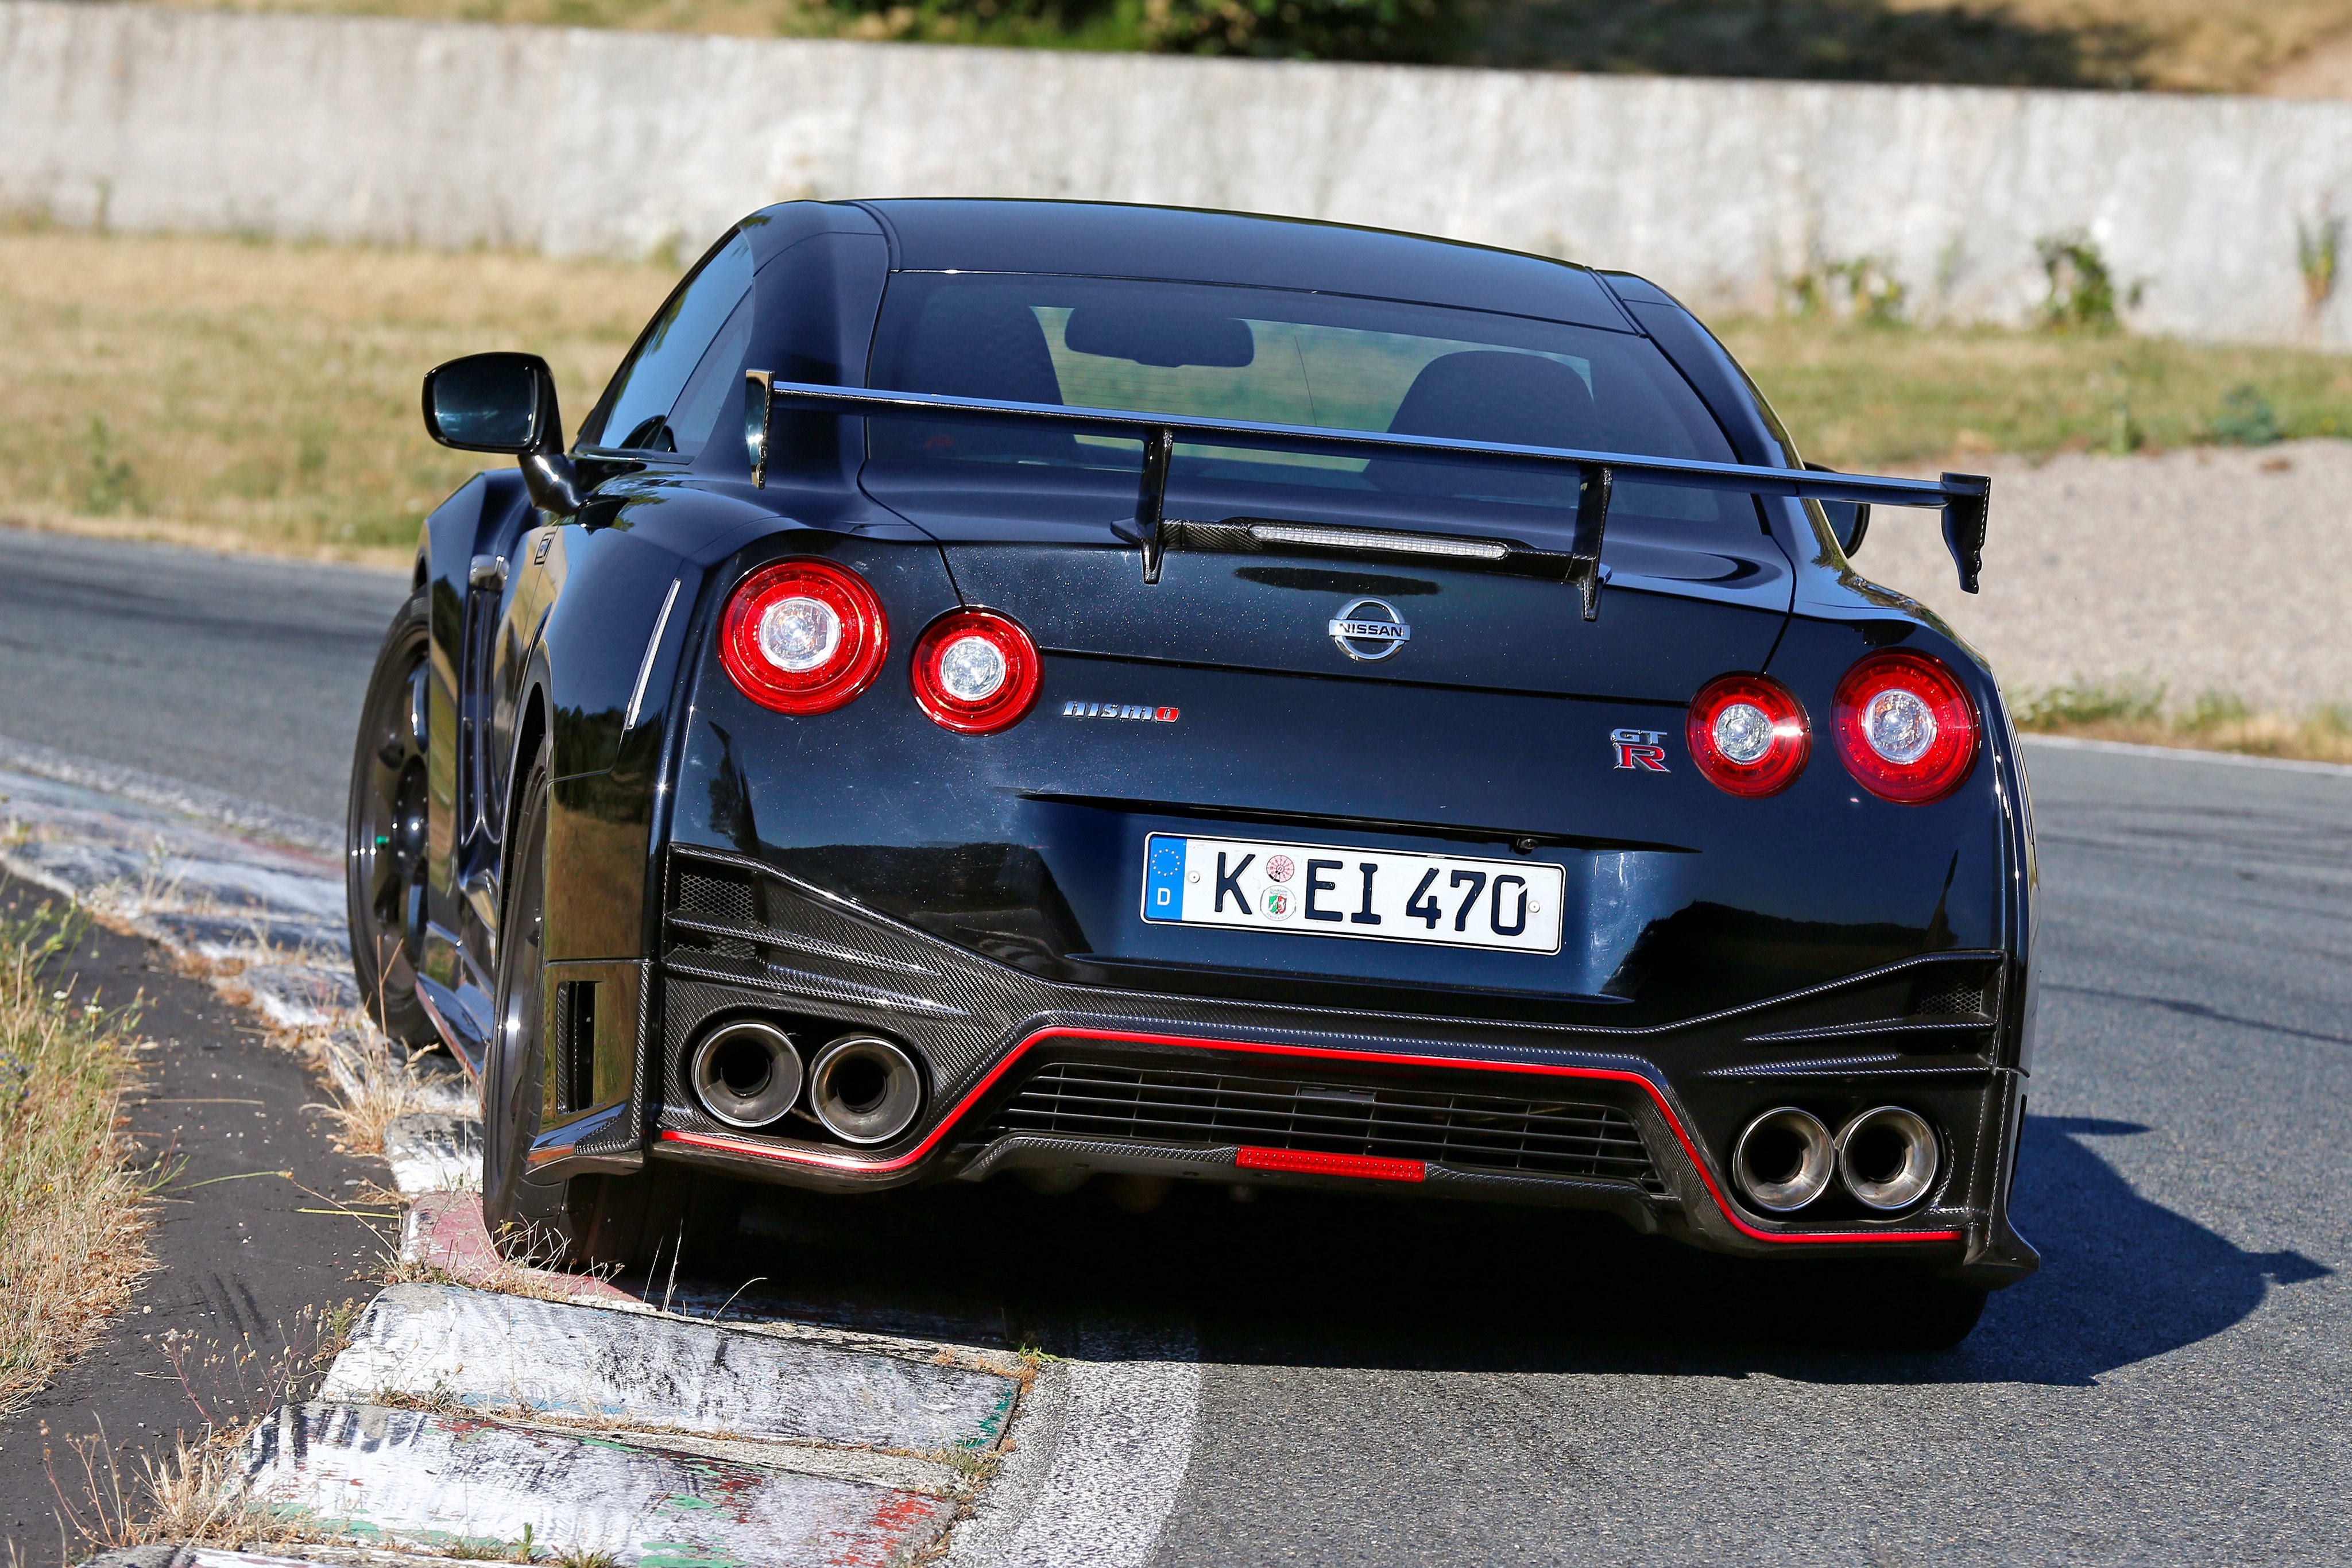 nissan, Gt r,  r35 , Coupe, Cars, 2014 Wallpaper